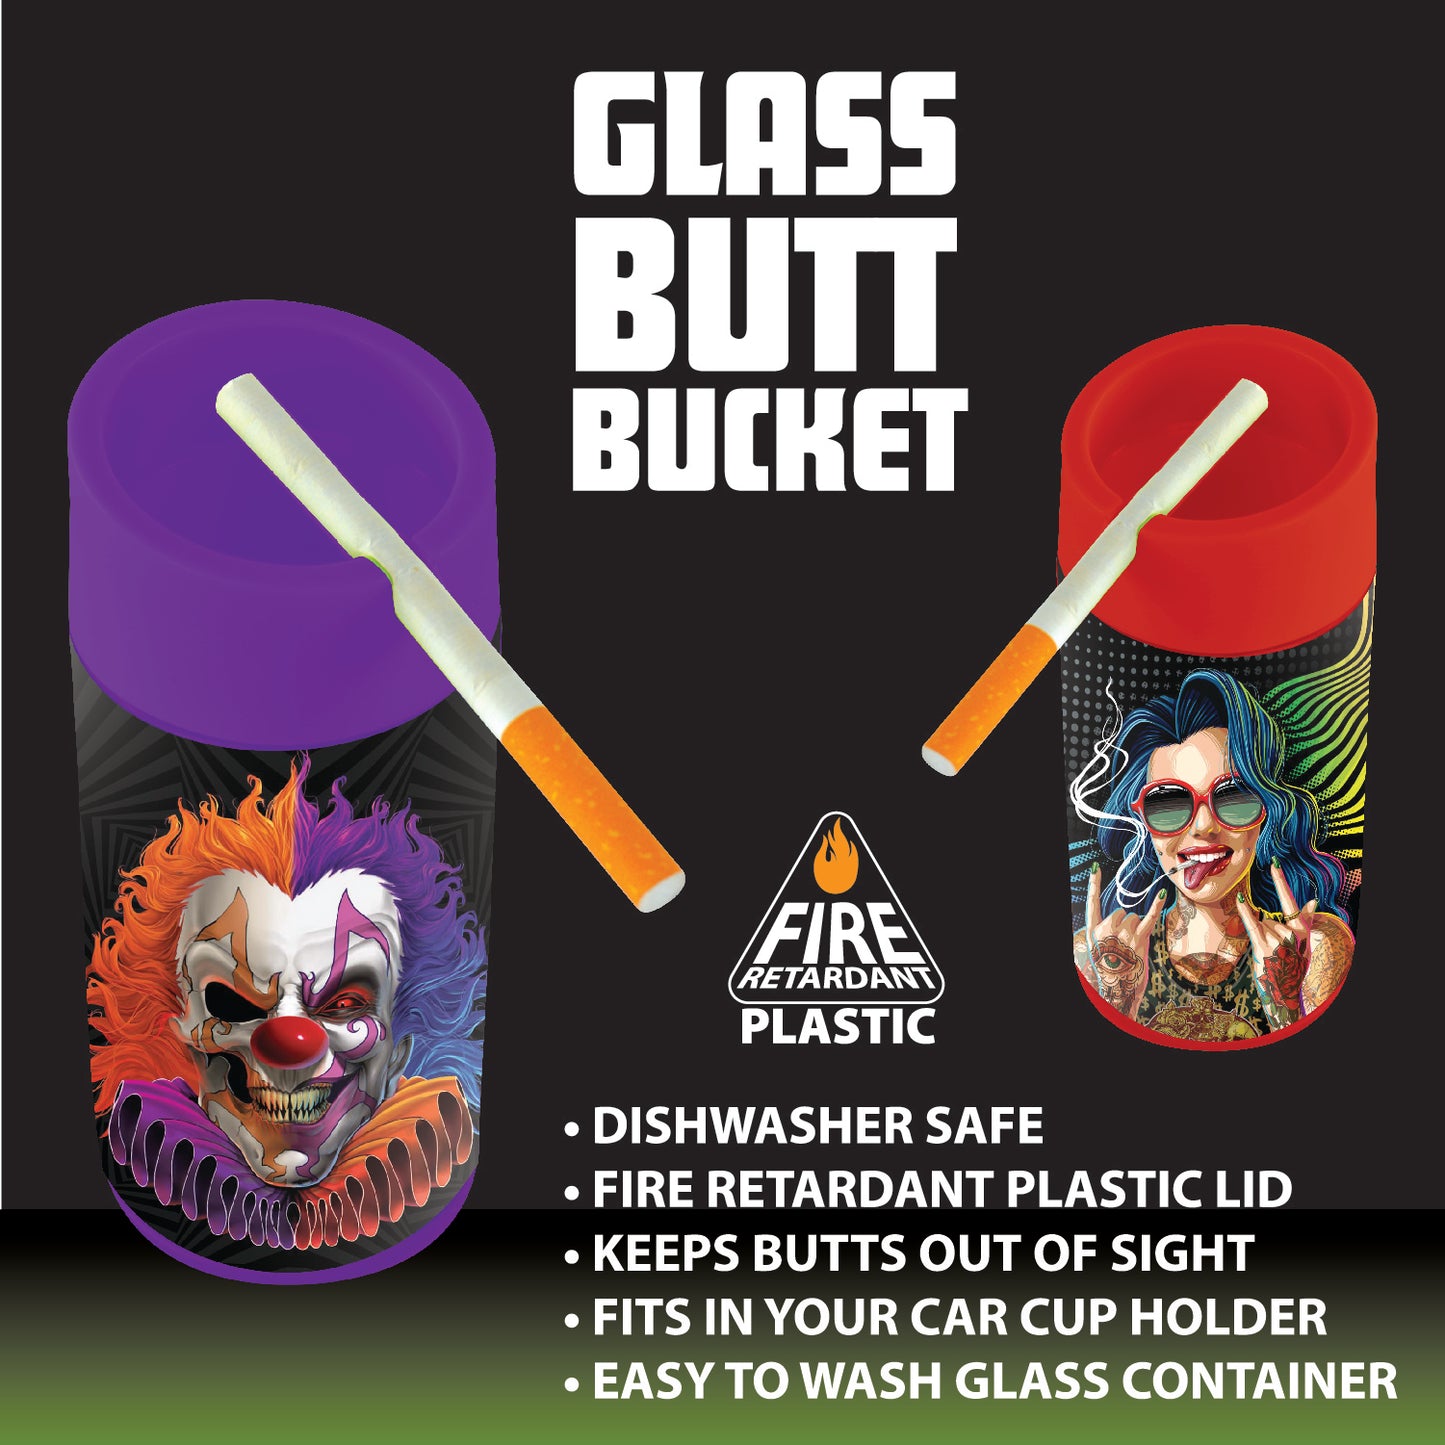 ITEM NUMBER 023291 GLASS BUTT BUCKET 6 PIECES PER DISPLAY